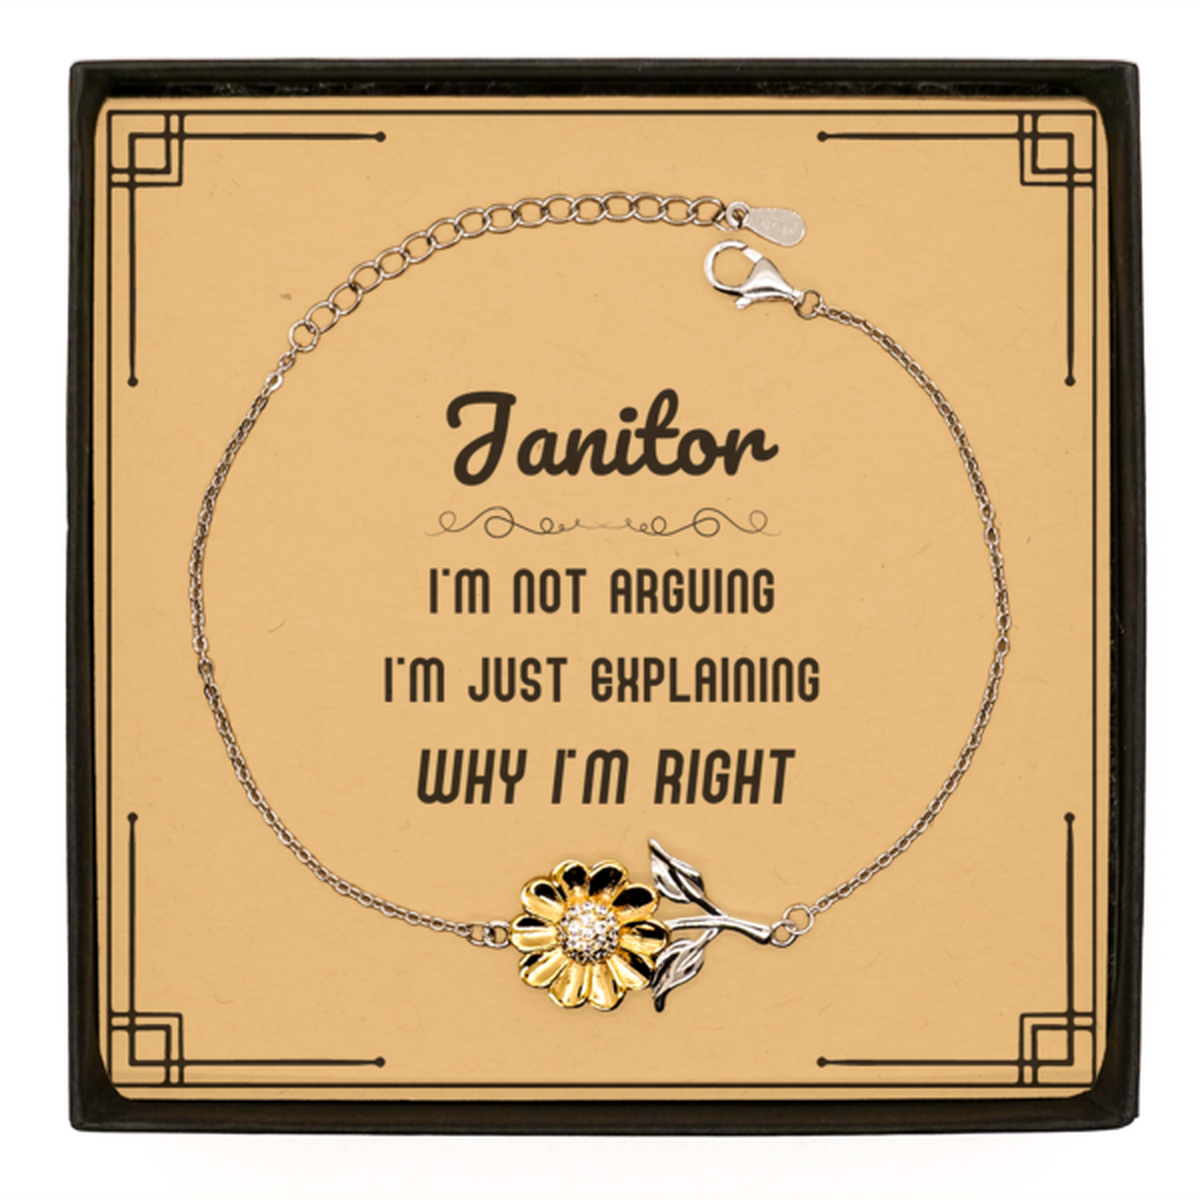 Janitor I'm not Arguing. I'm Just Explaining Why I'm RIGHT Sunflower Bracelet, Funny Saying Quote Janitor Gifts For Janitor Message Card Graduation Birthday Christmas Gifts for Men Women Coworker